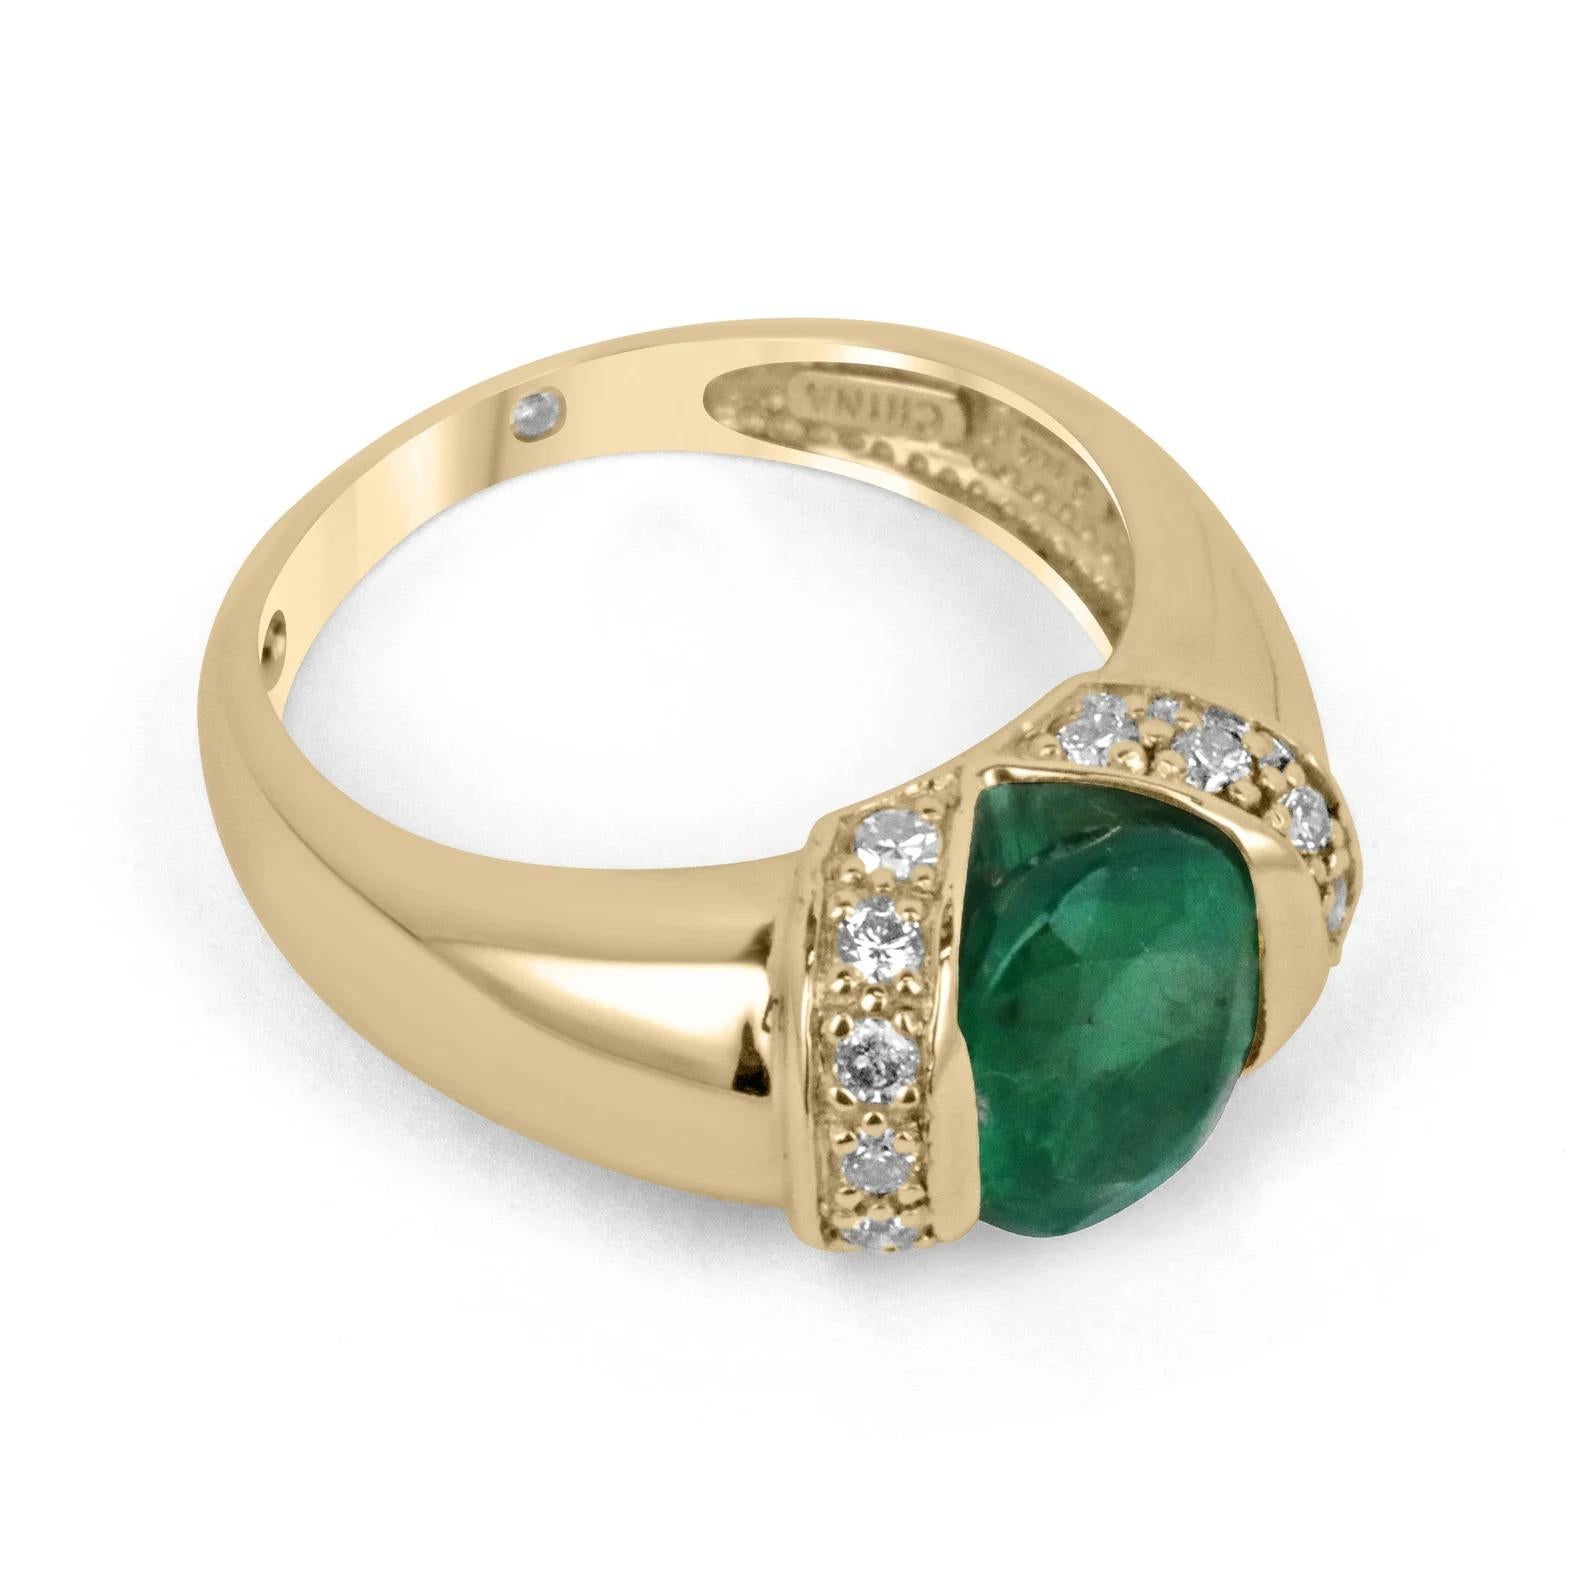 Displayed is a natural emerald & diamond accent ring in 14K yellow gold. This gorgeous ring carries a full 2.0-carat oval cut emerald from the origins of Zambia. The gem displays a gorgeous medium dark green color, tension set with thick gold with